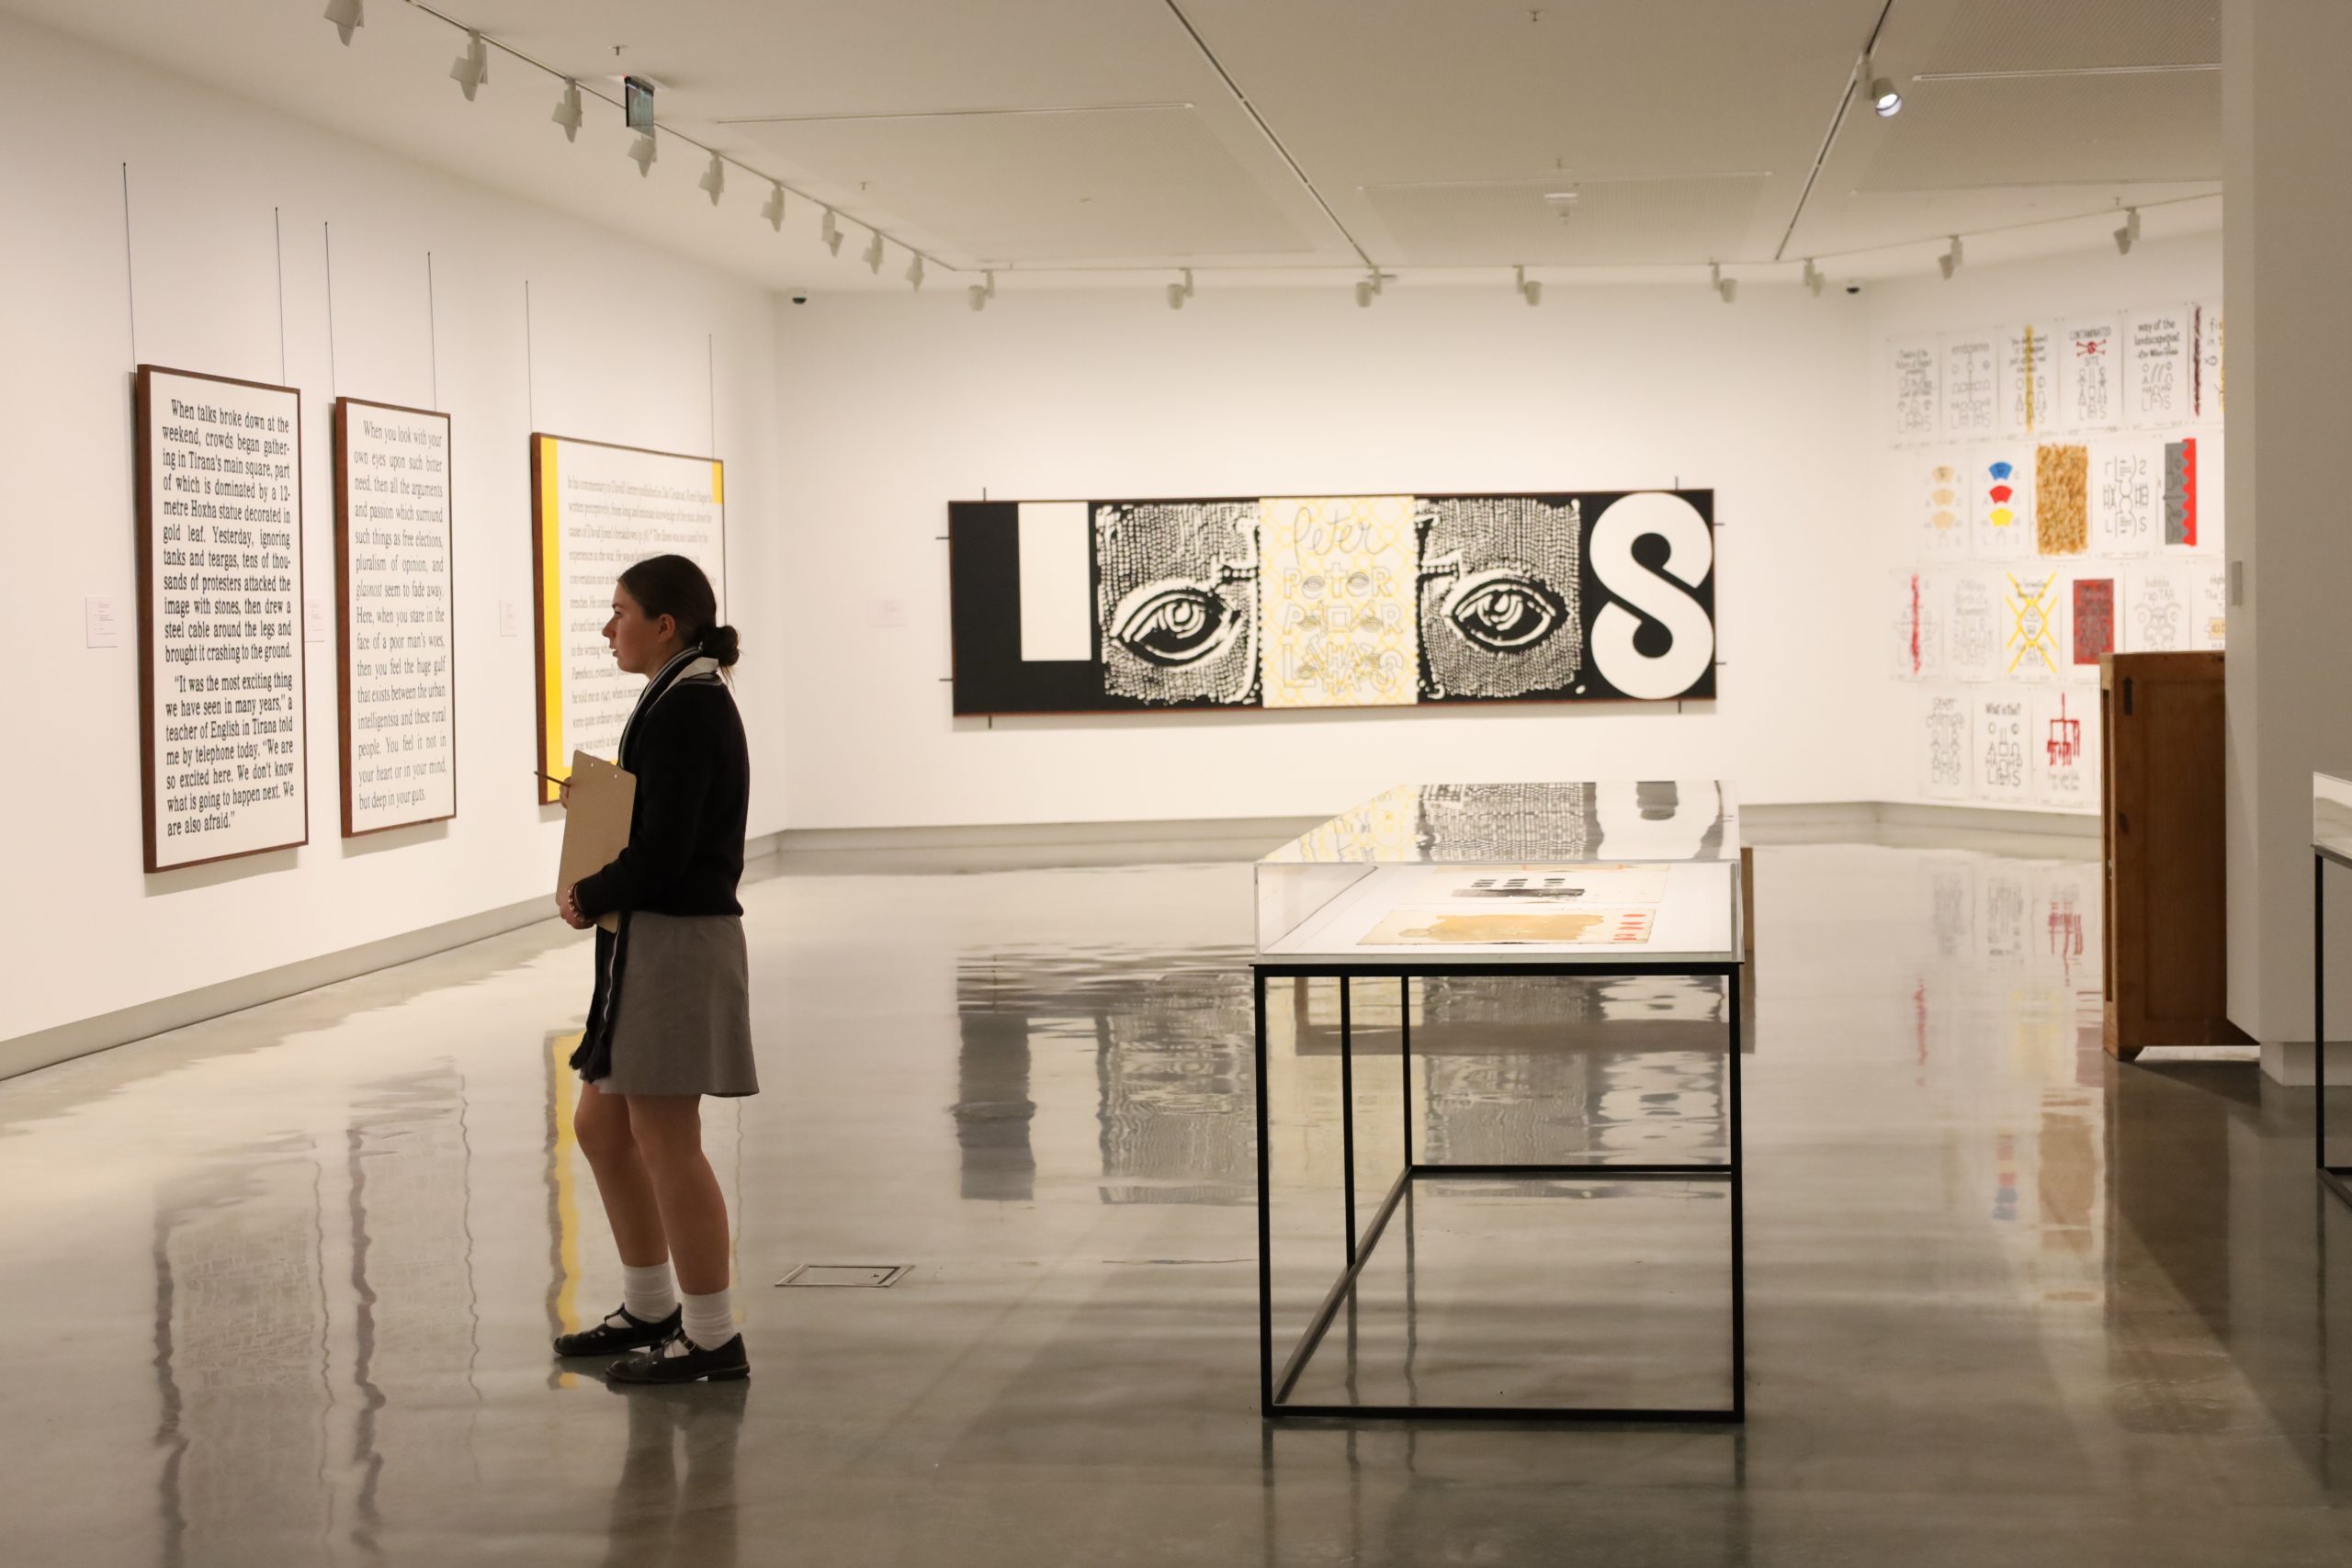 A female student looks at artwork in an empty gallery